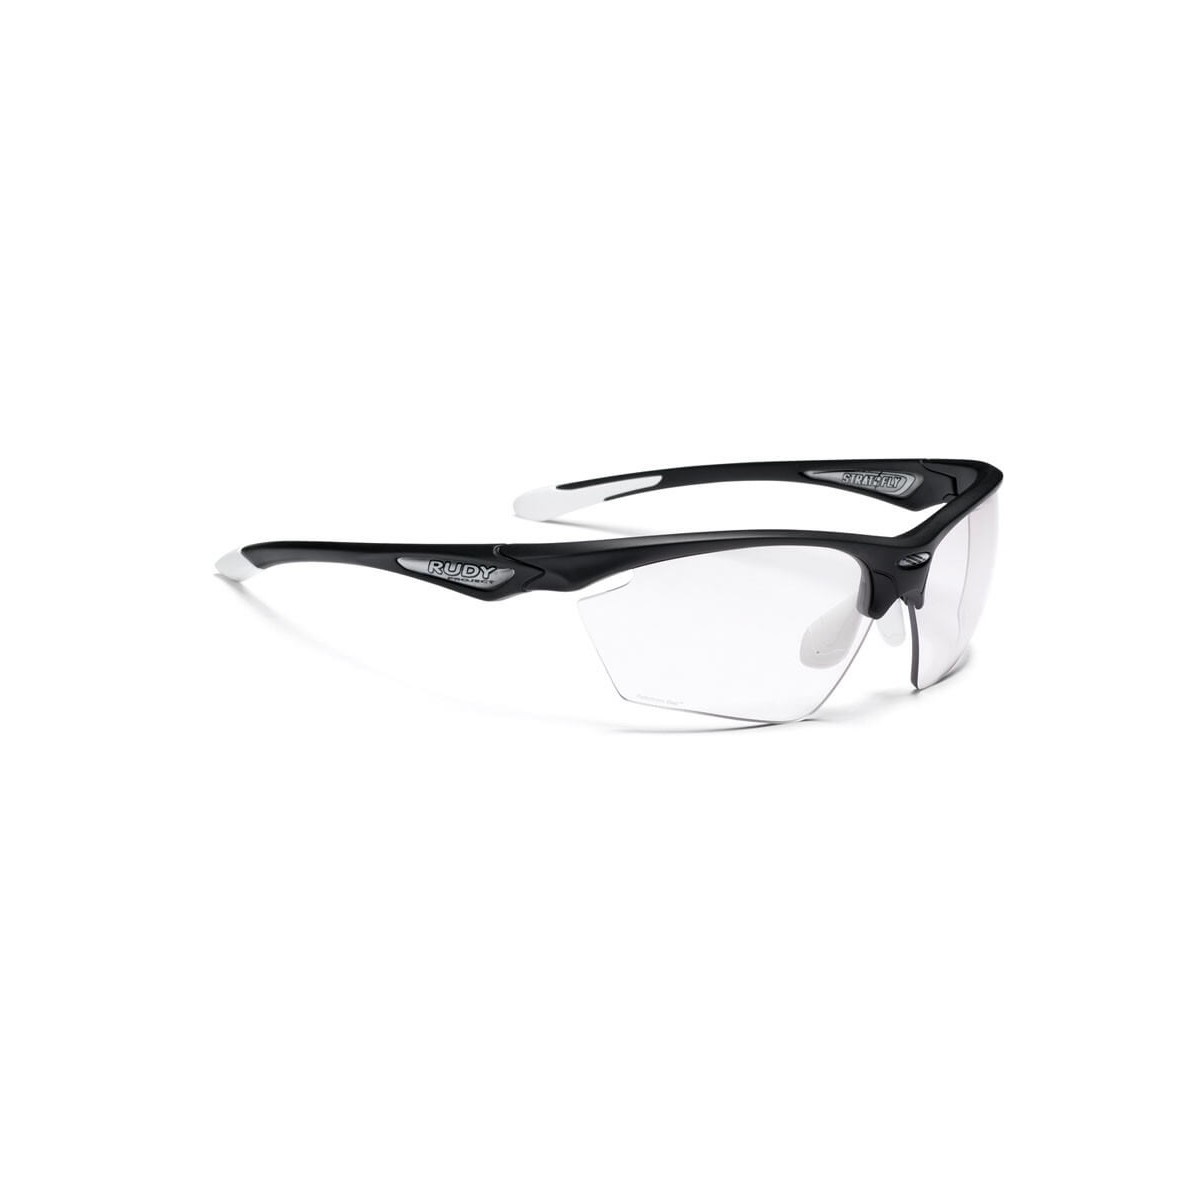 Glasses Stratofly Black Gloss RPO Photoclear Rudy Project